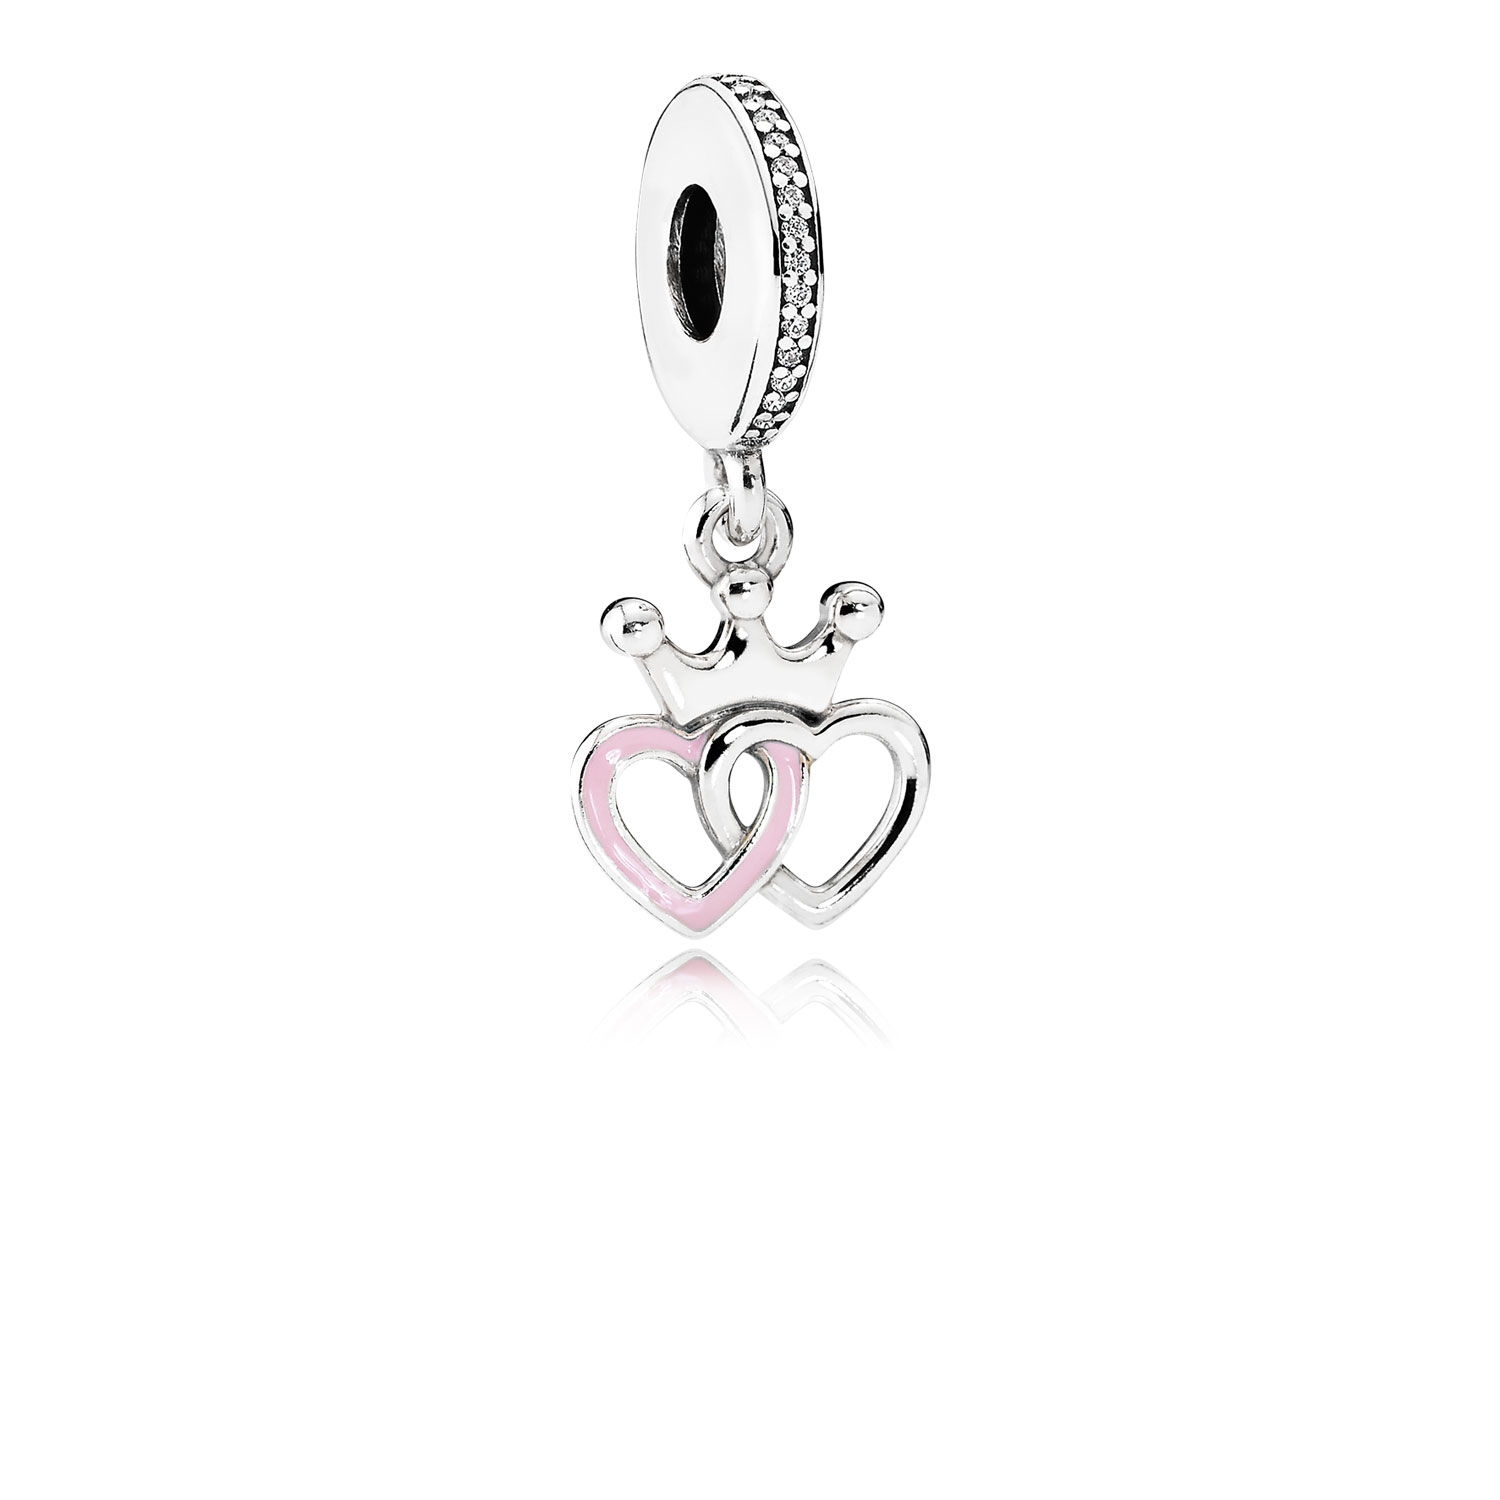 Pandora Crowned Hearts Dangle Charm, Orchid Pink Enamel & Clear